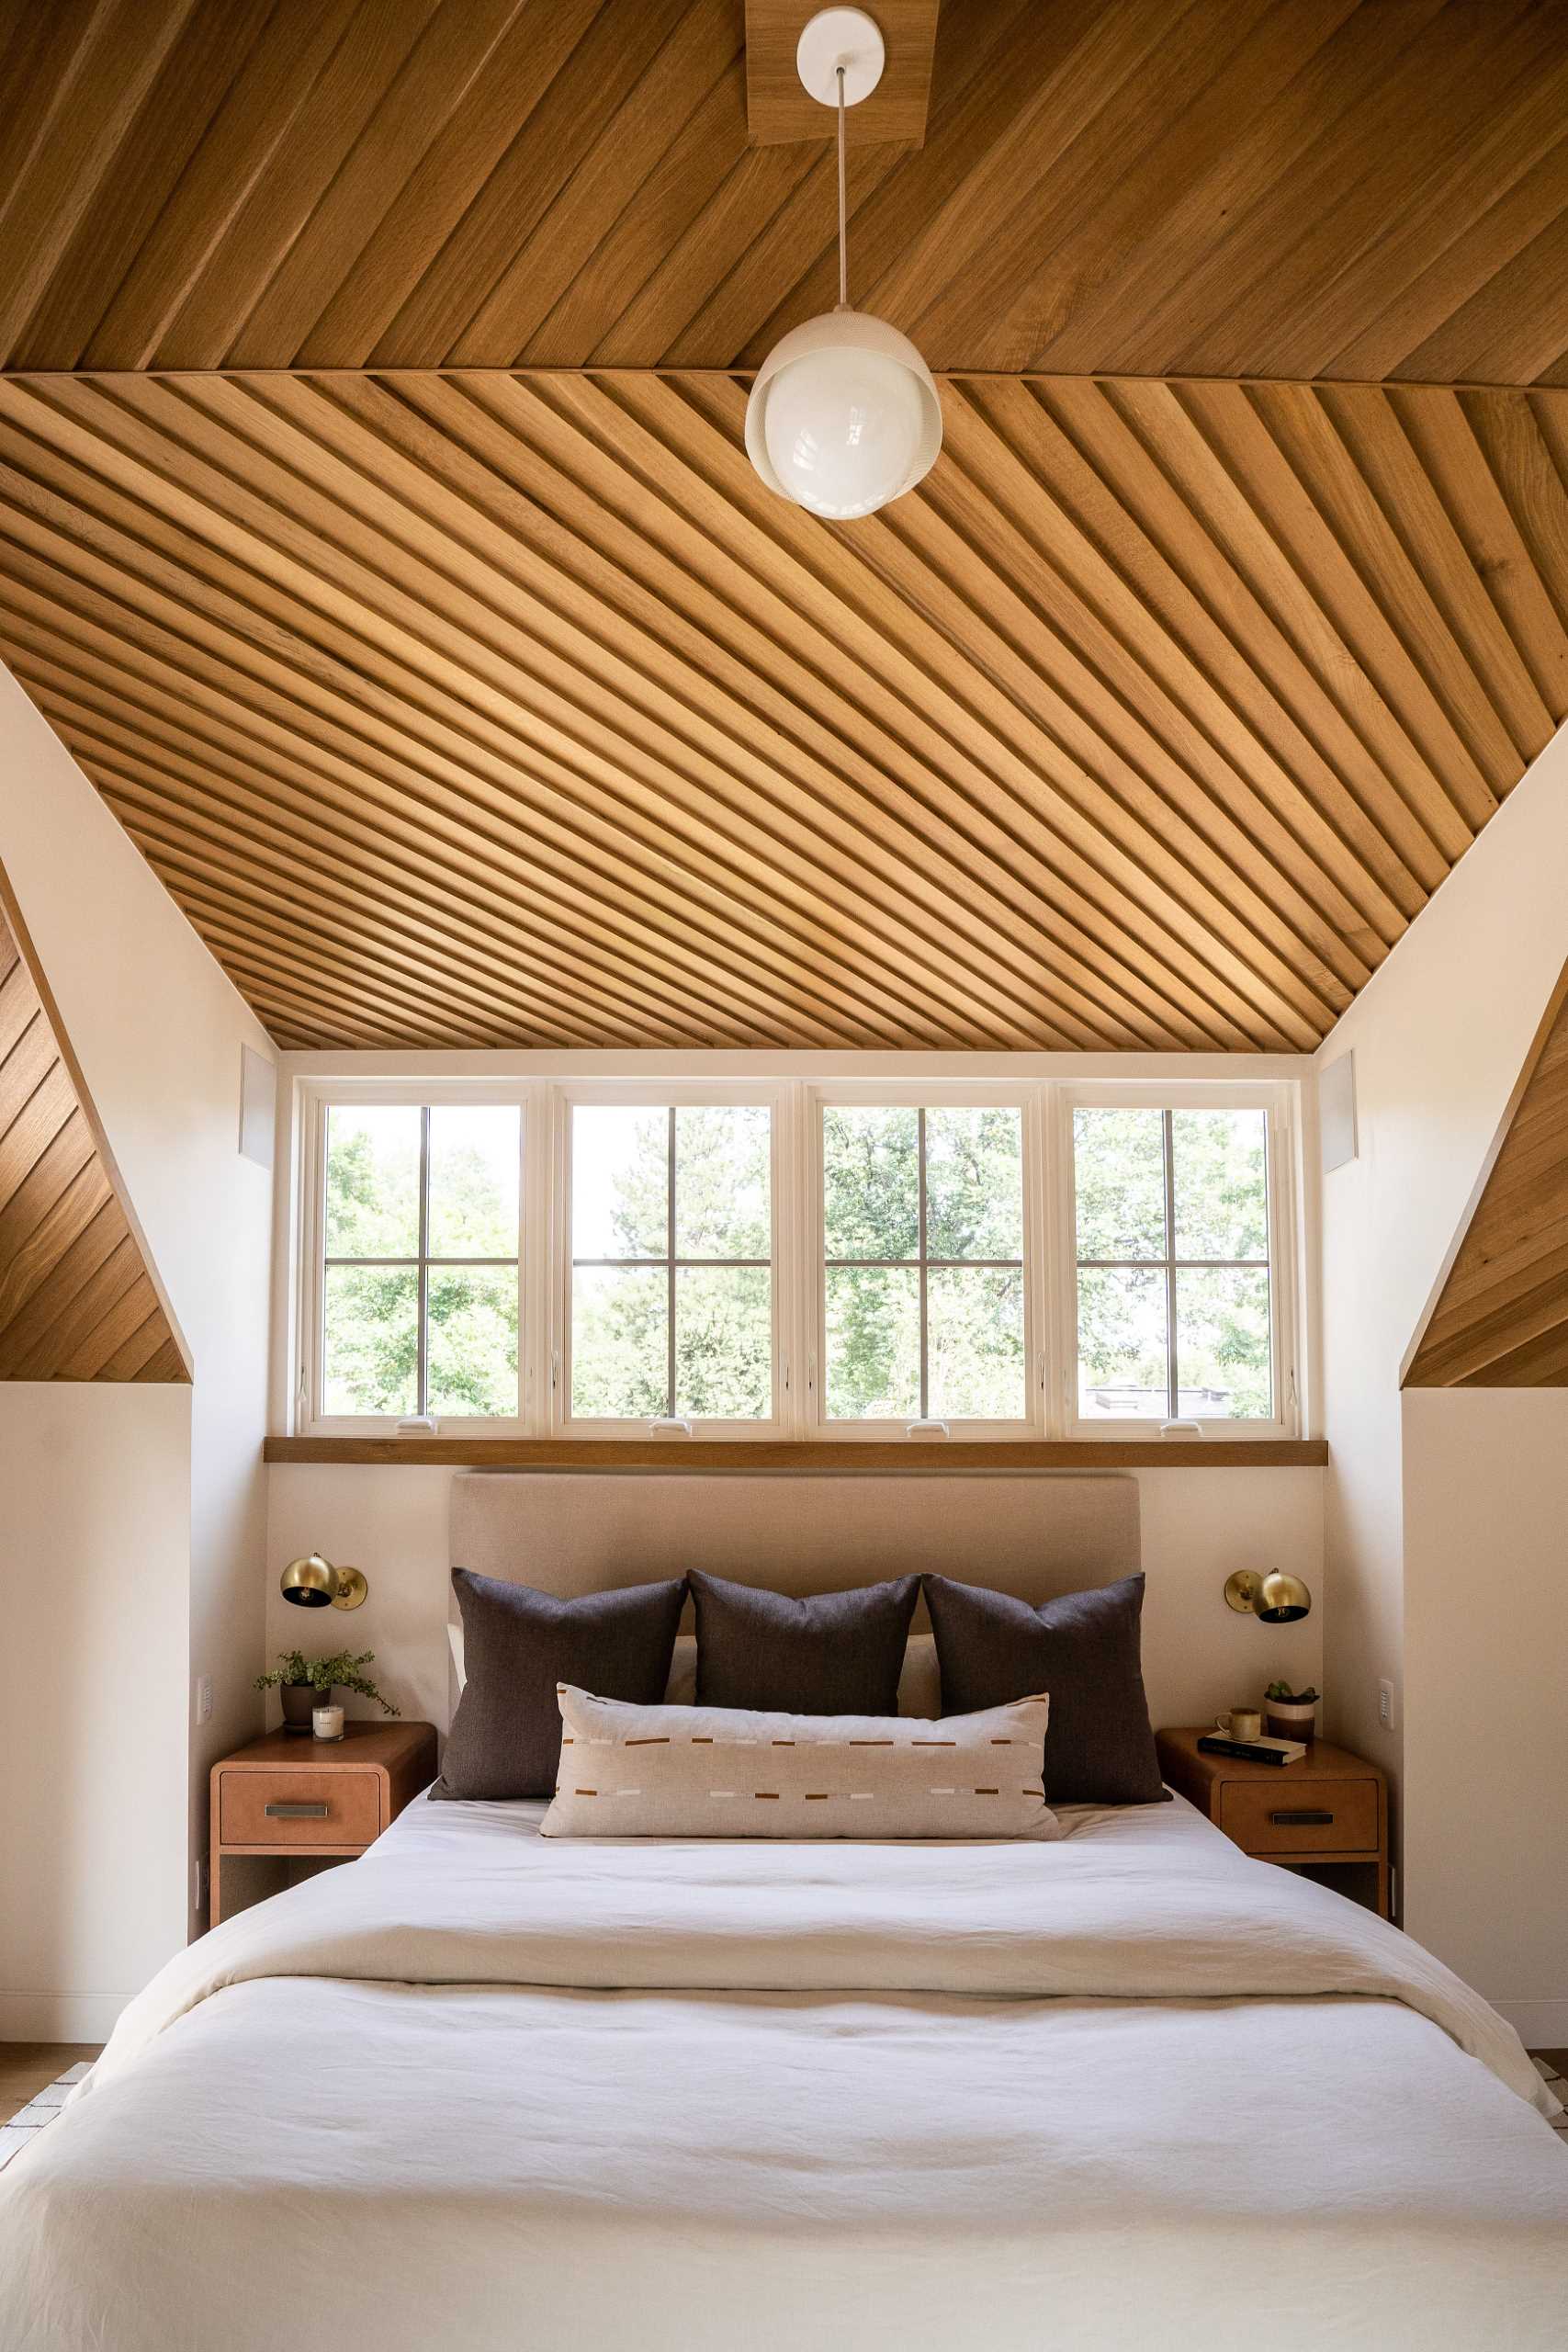 In this main bedroom, the ceiling is composed of lap siding installed at an angle, aligned perfectly at the ridge, while built-in dressers make smart use of the available space.